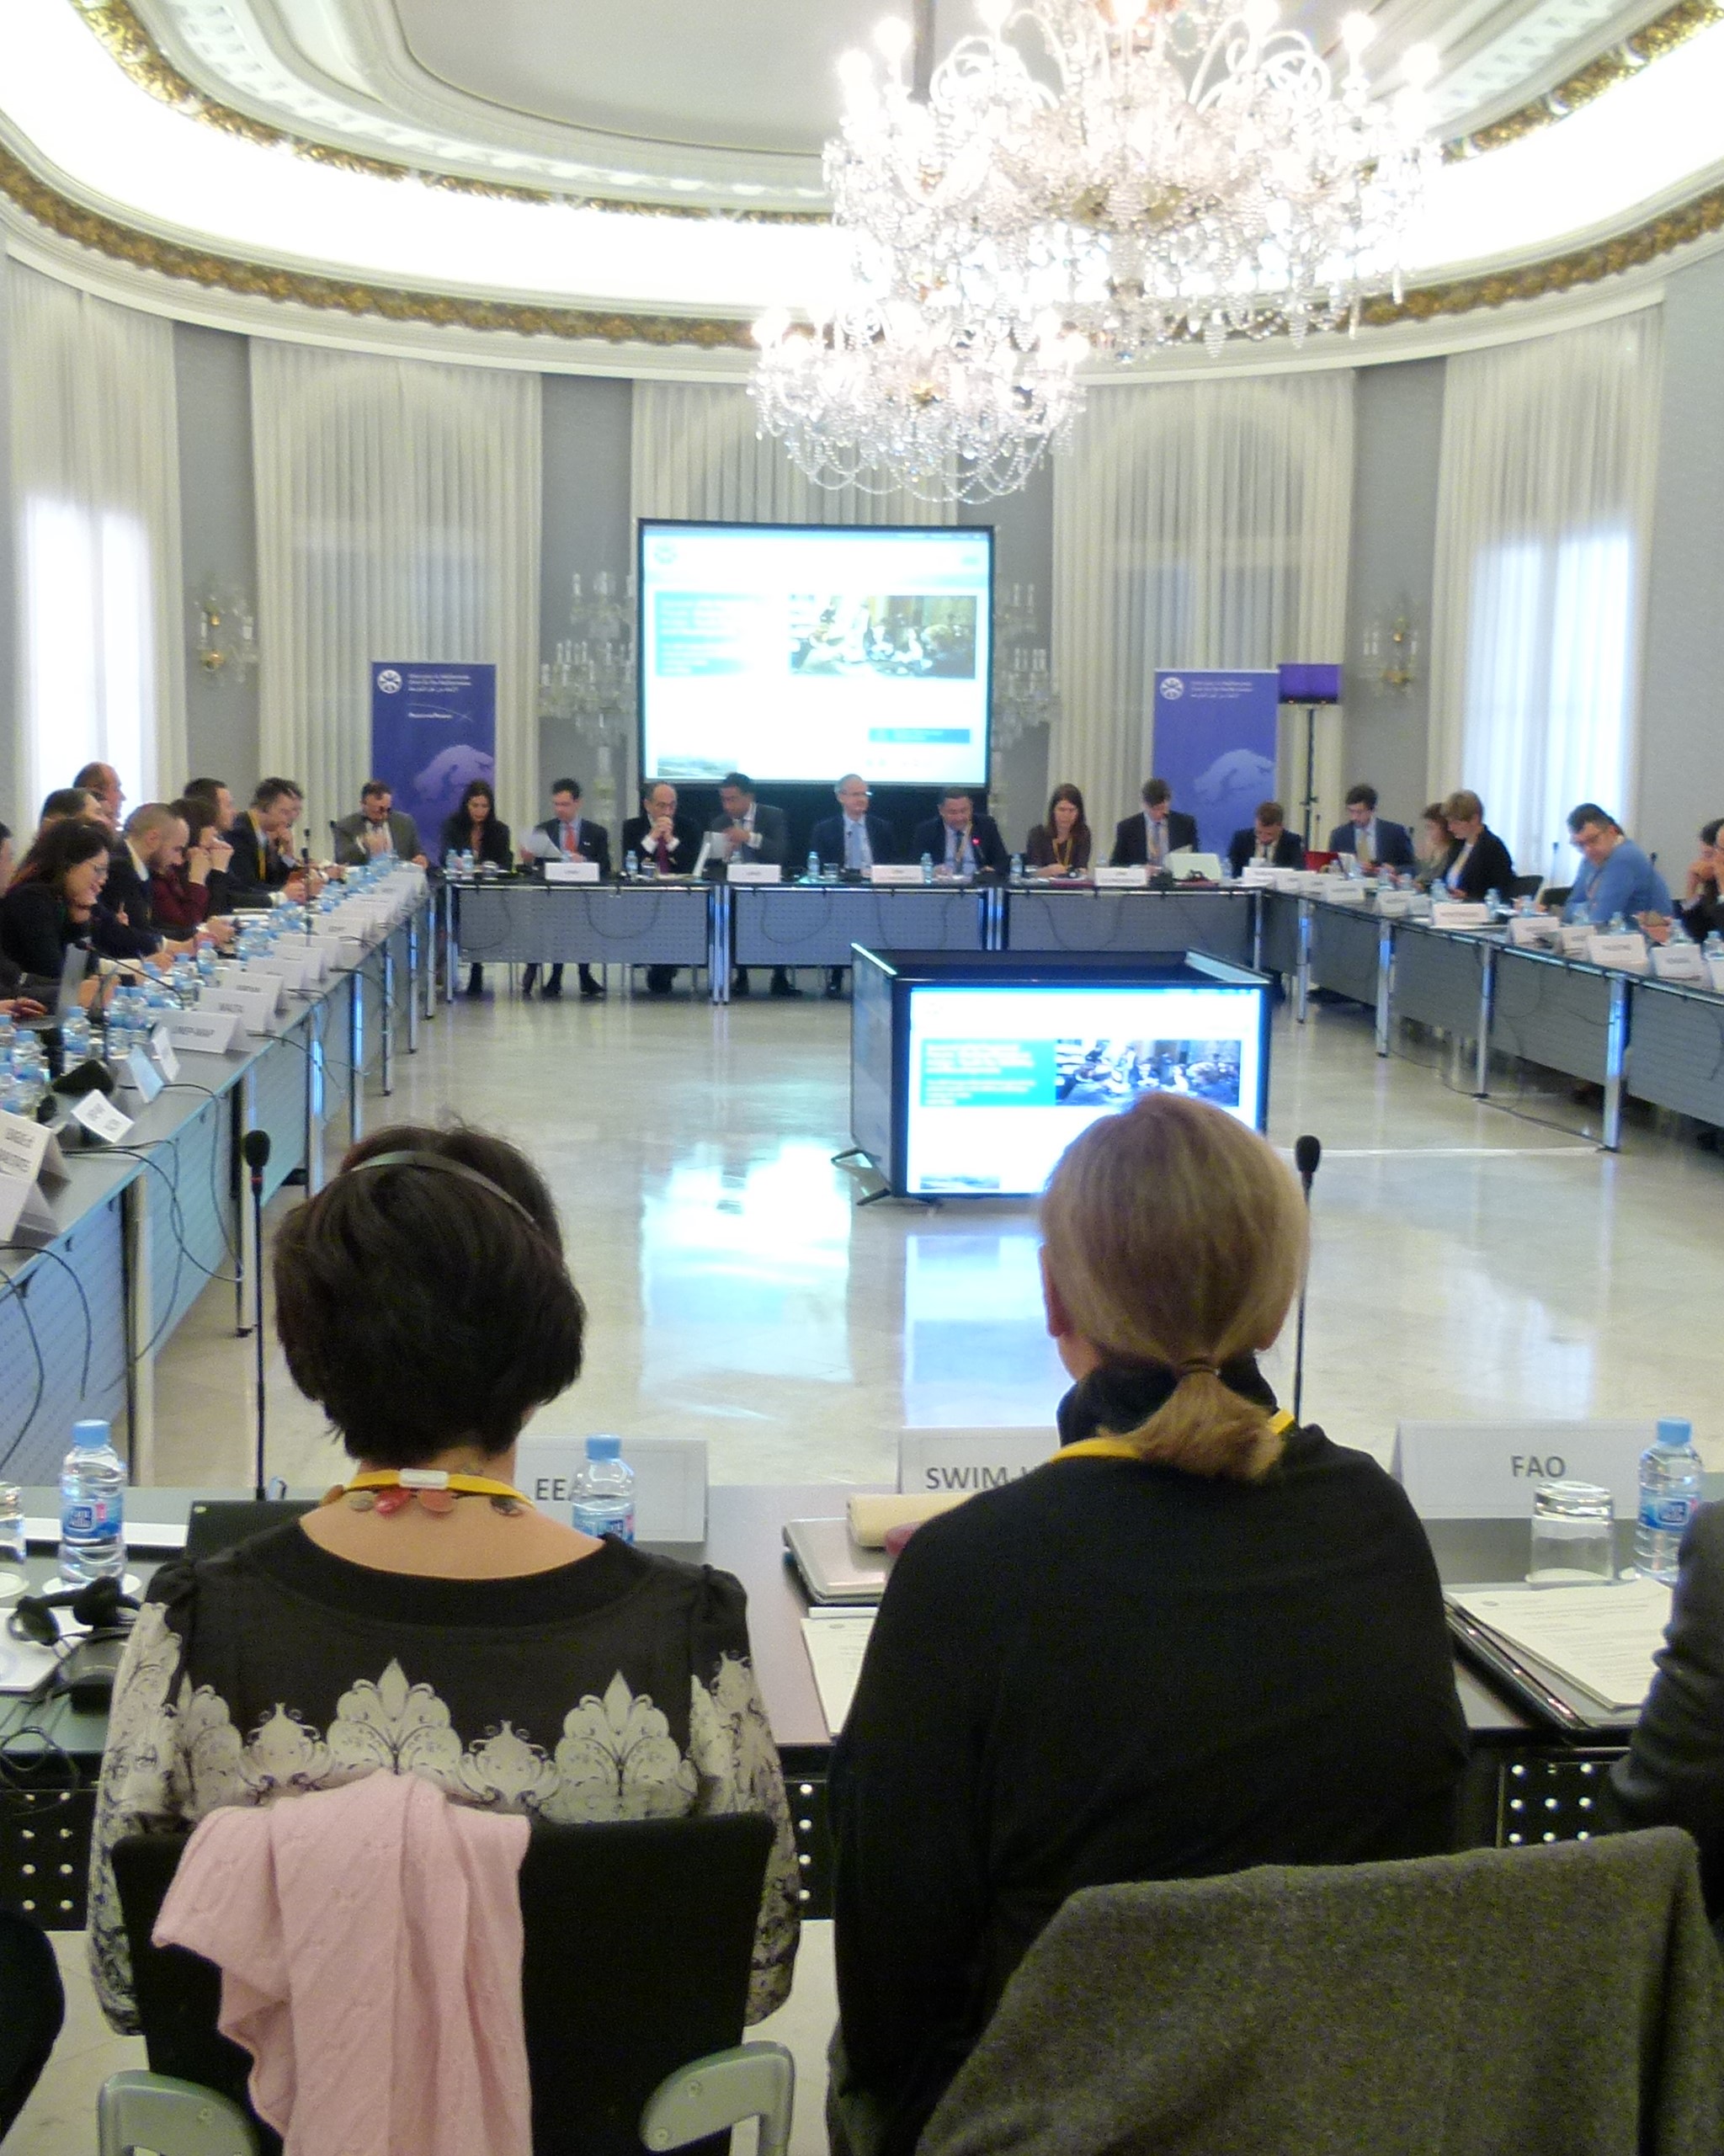 14-15 March 2017, Barcelona, Spain – Union for Mediterranean (UfM) First Meeting of the Working Group on Environment and Climate Change